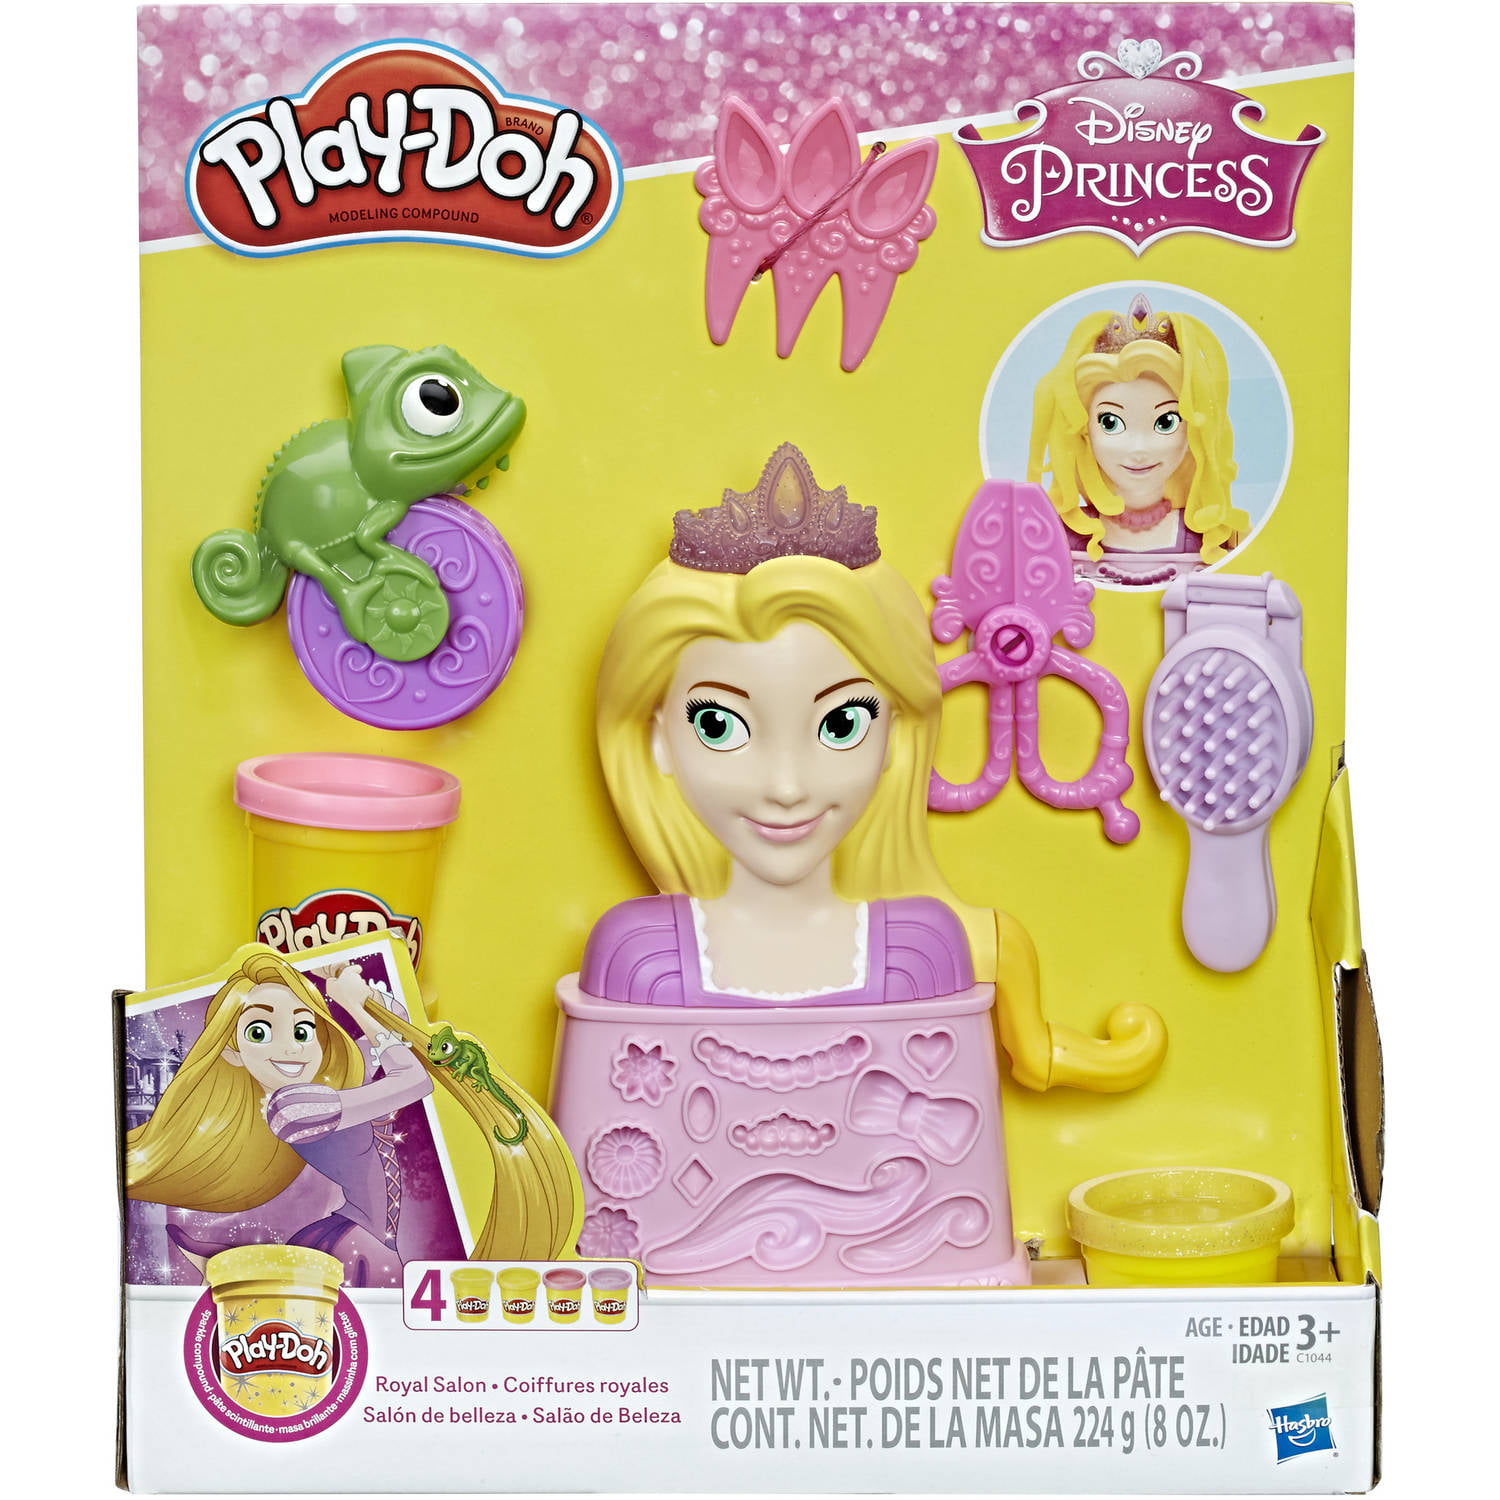 Play-Doh Disney Princess 3 Cans of Play-Doh Included